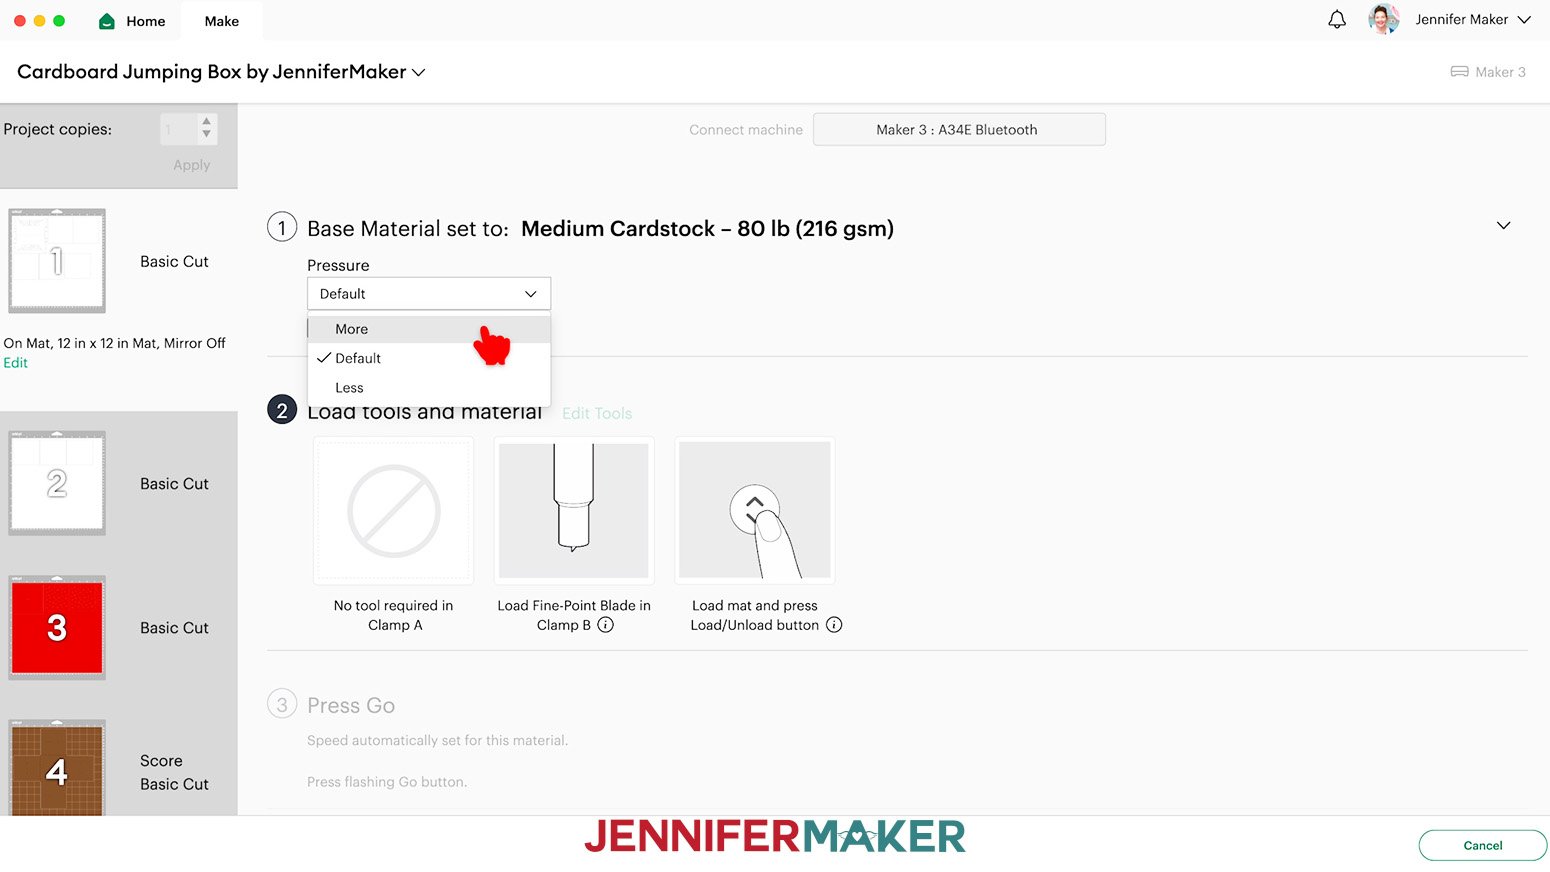 In Cricut Design Space, select the "Medium Cardstock - 80 lb (216 gsm)" setting with More Pressure for the cardboard jumping box 65 lb cardstock pieces